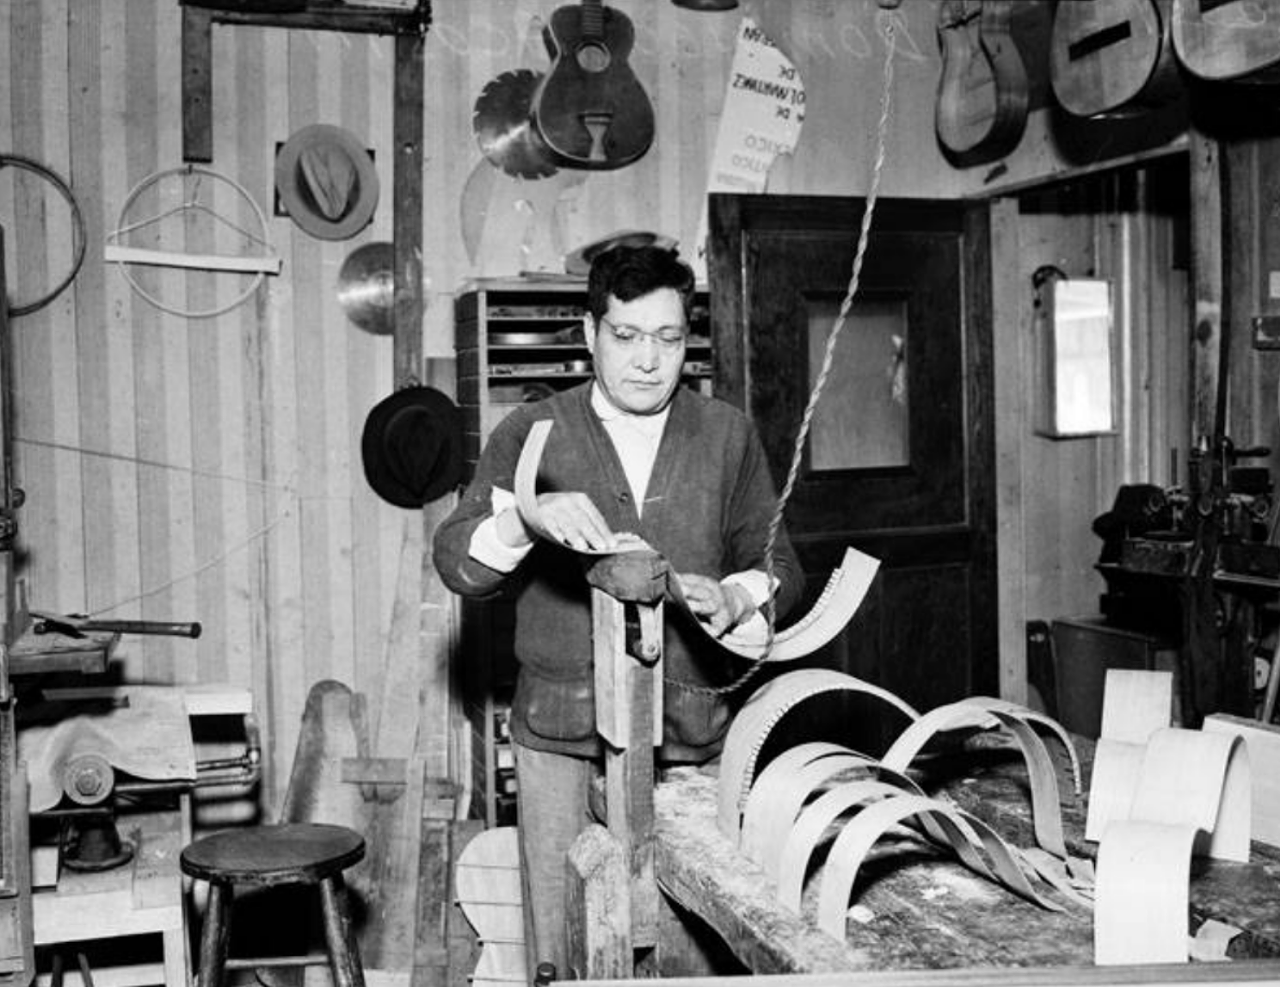 In this 1937 photo shows Domingo Acosta working on a guitar at his family's guitar business. He's using a special homemade device to work on the instrument.